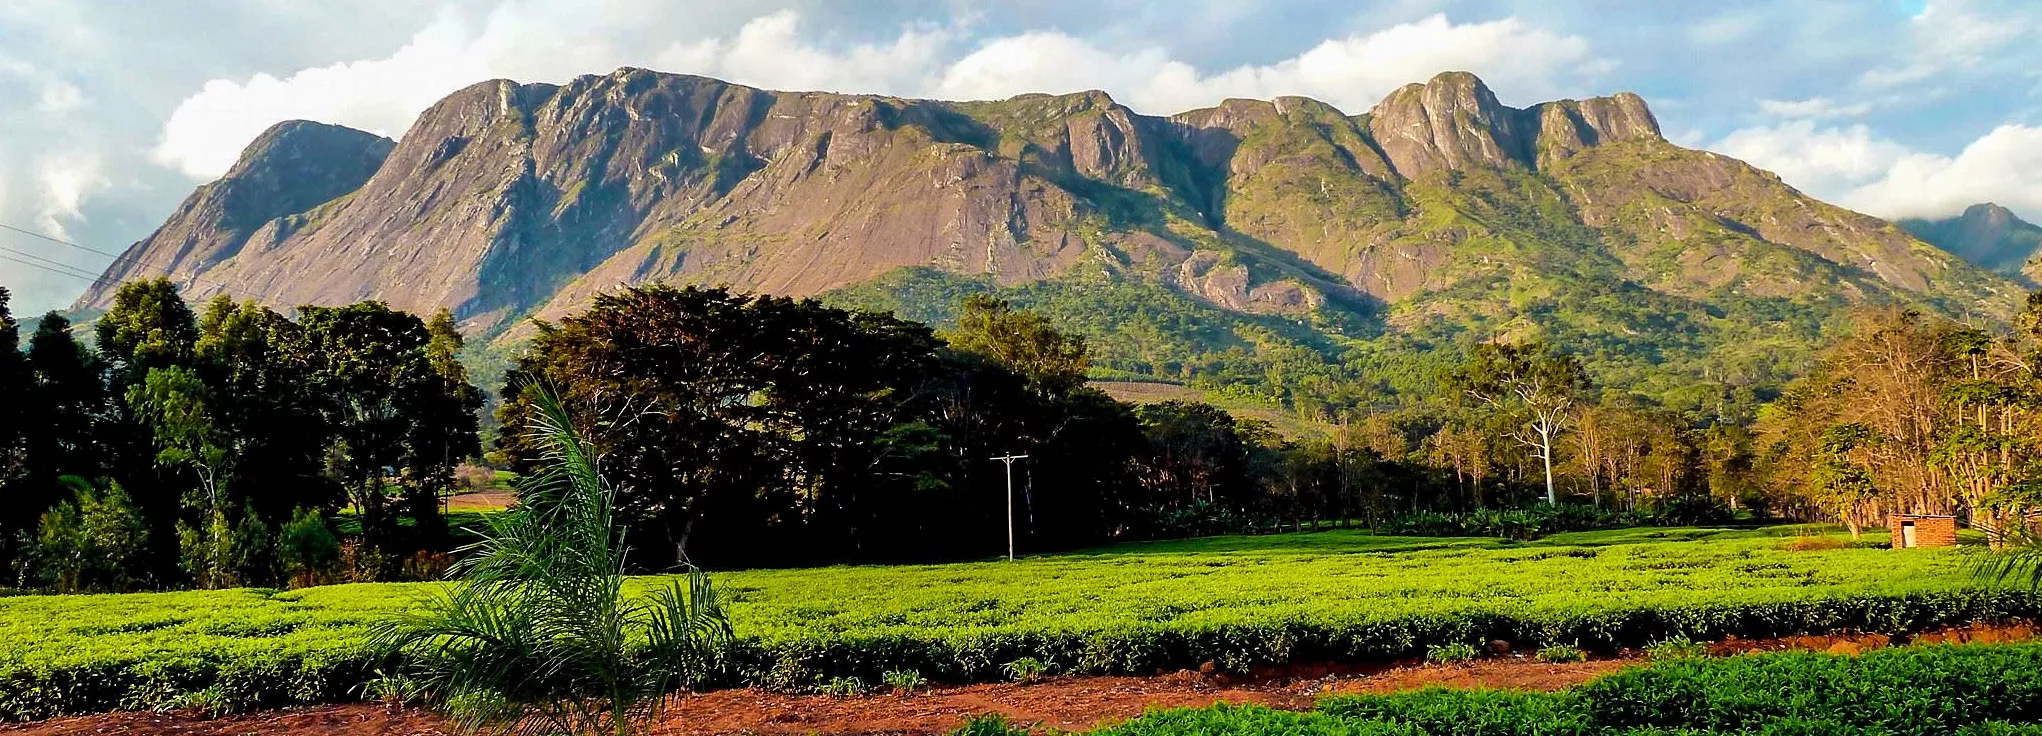 Zomba Plateau in Malawi, Africa | Mountains,Trekking & Hiking - Rated 0.7